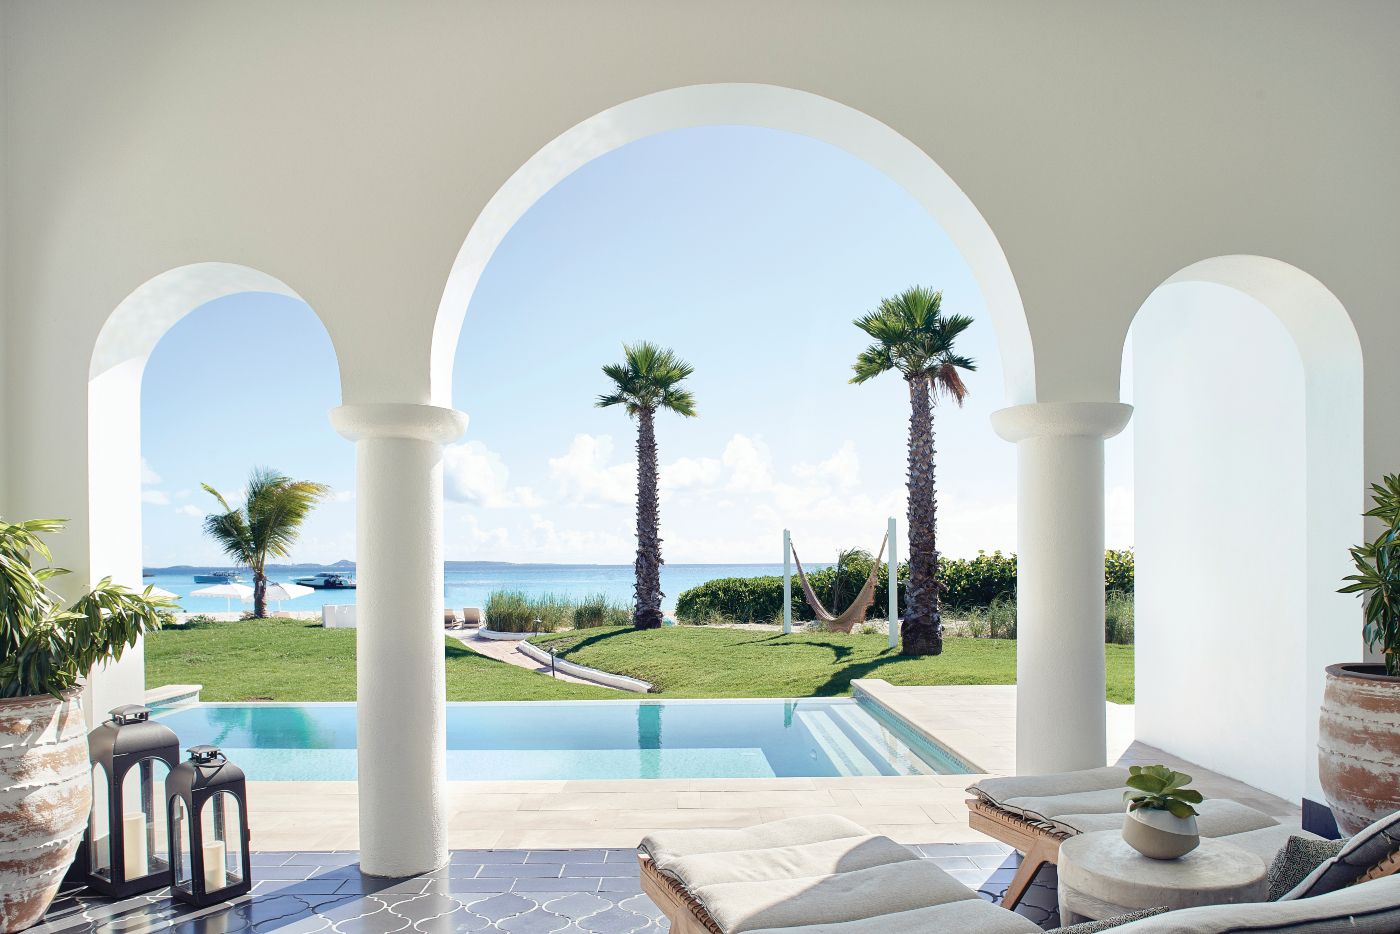 One of the best resorts in the world is in Anguilla and has a daily rate of BRL 9,000